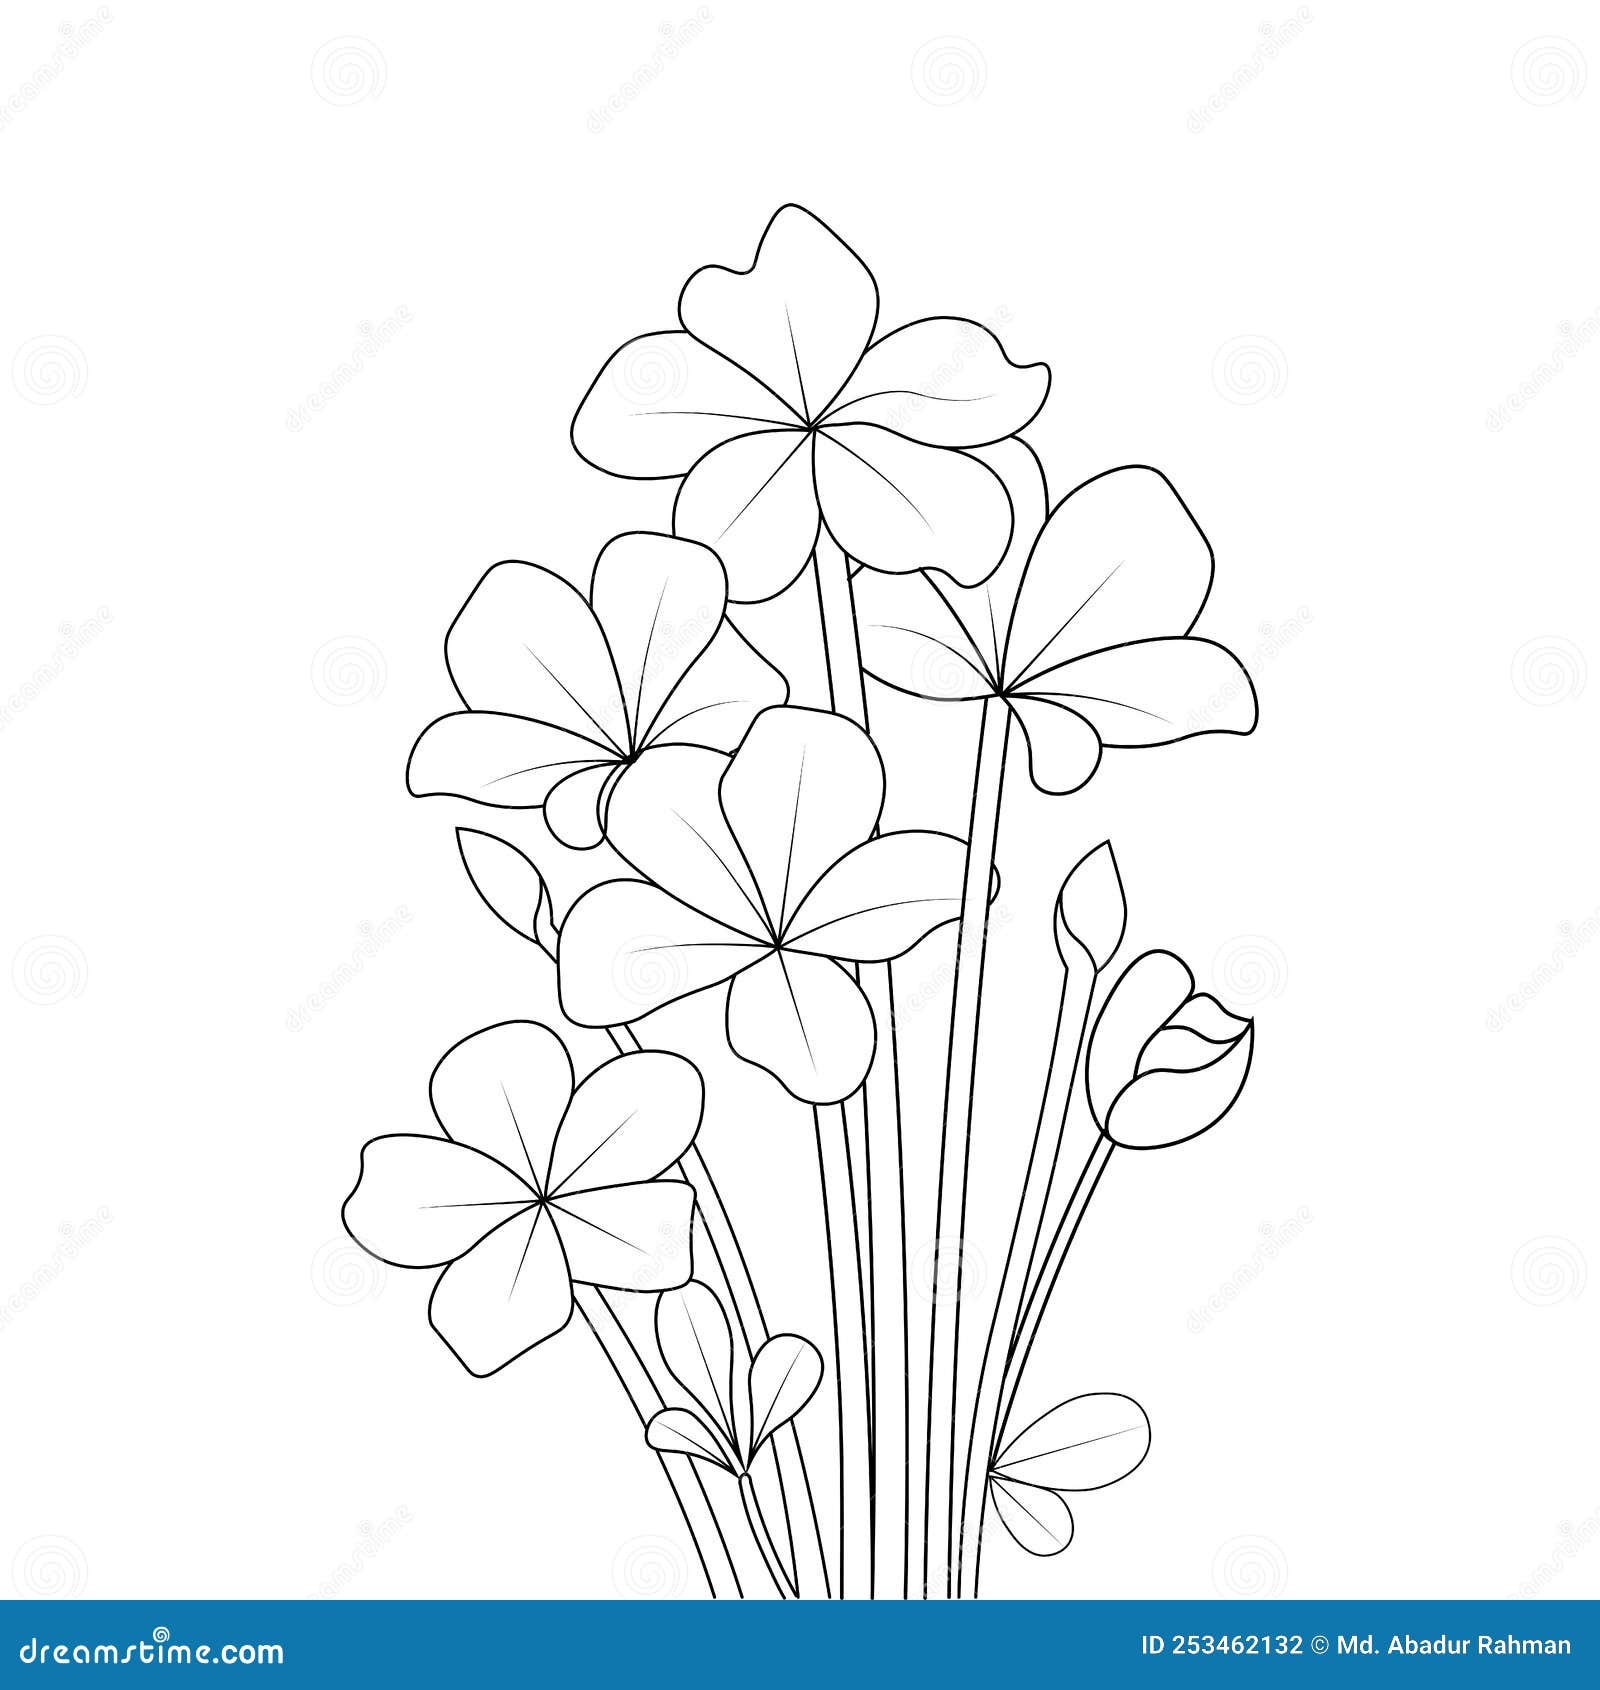 Cute kids coloring pages, easy pansy flower drawing, pansy flower black and  white illustration, pansy flower vector art, simple flower drawing. Stock  Vector | Adobe Stock